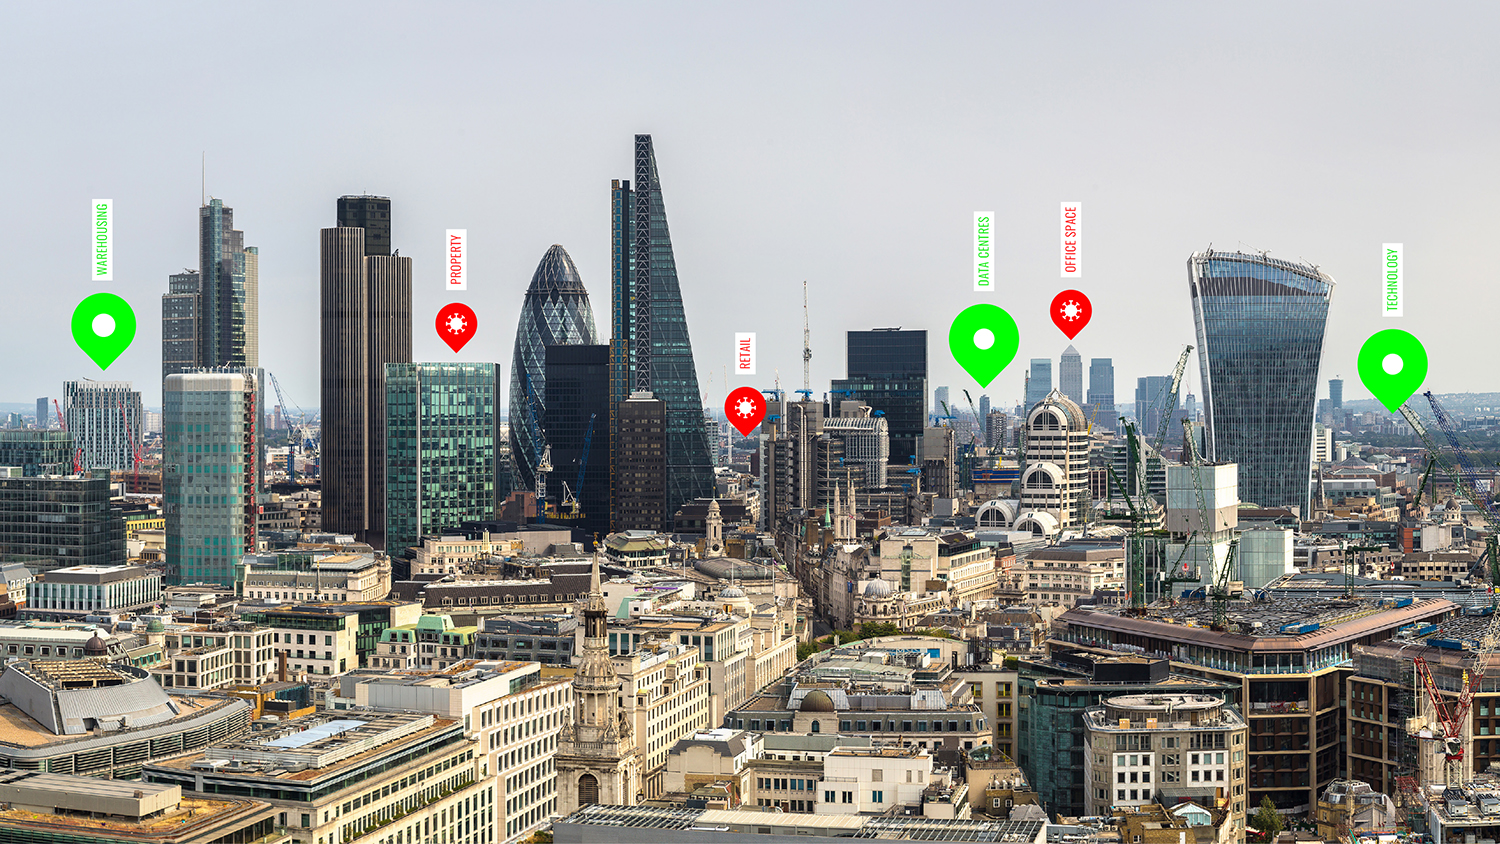 London skyline with labelled buildings